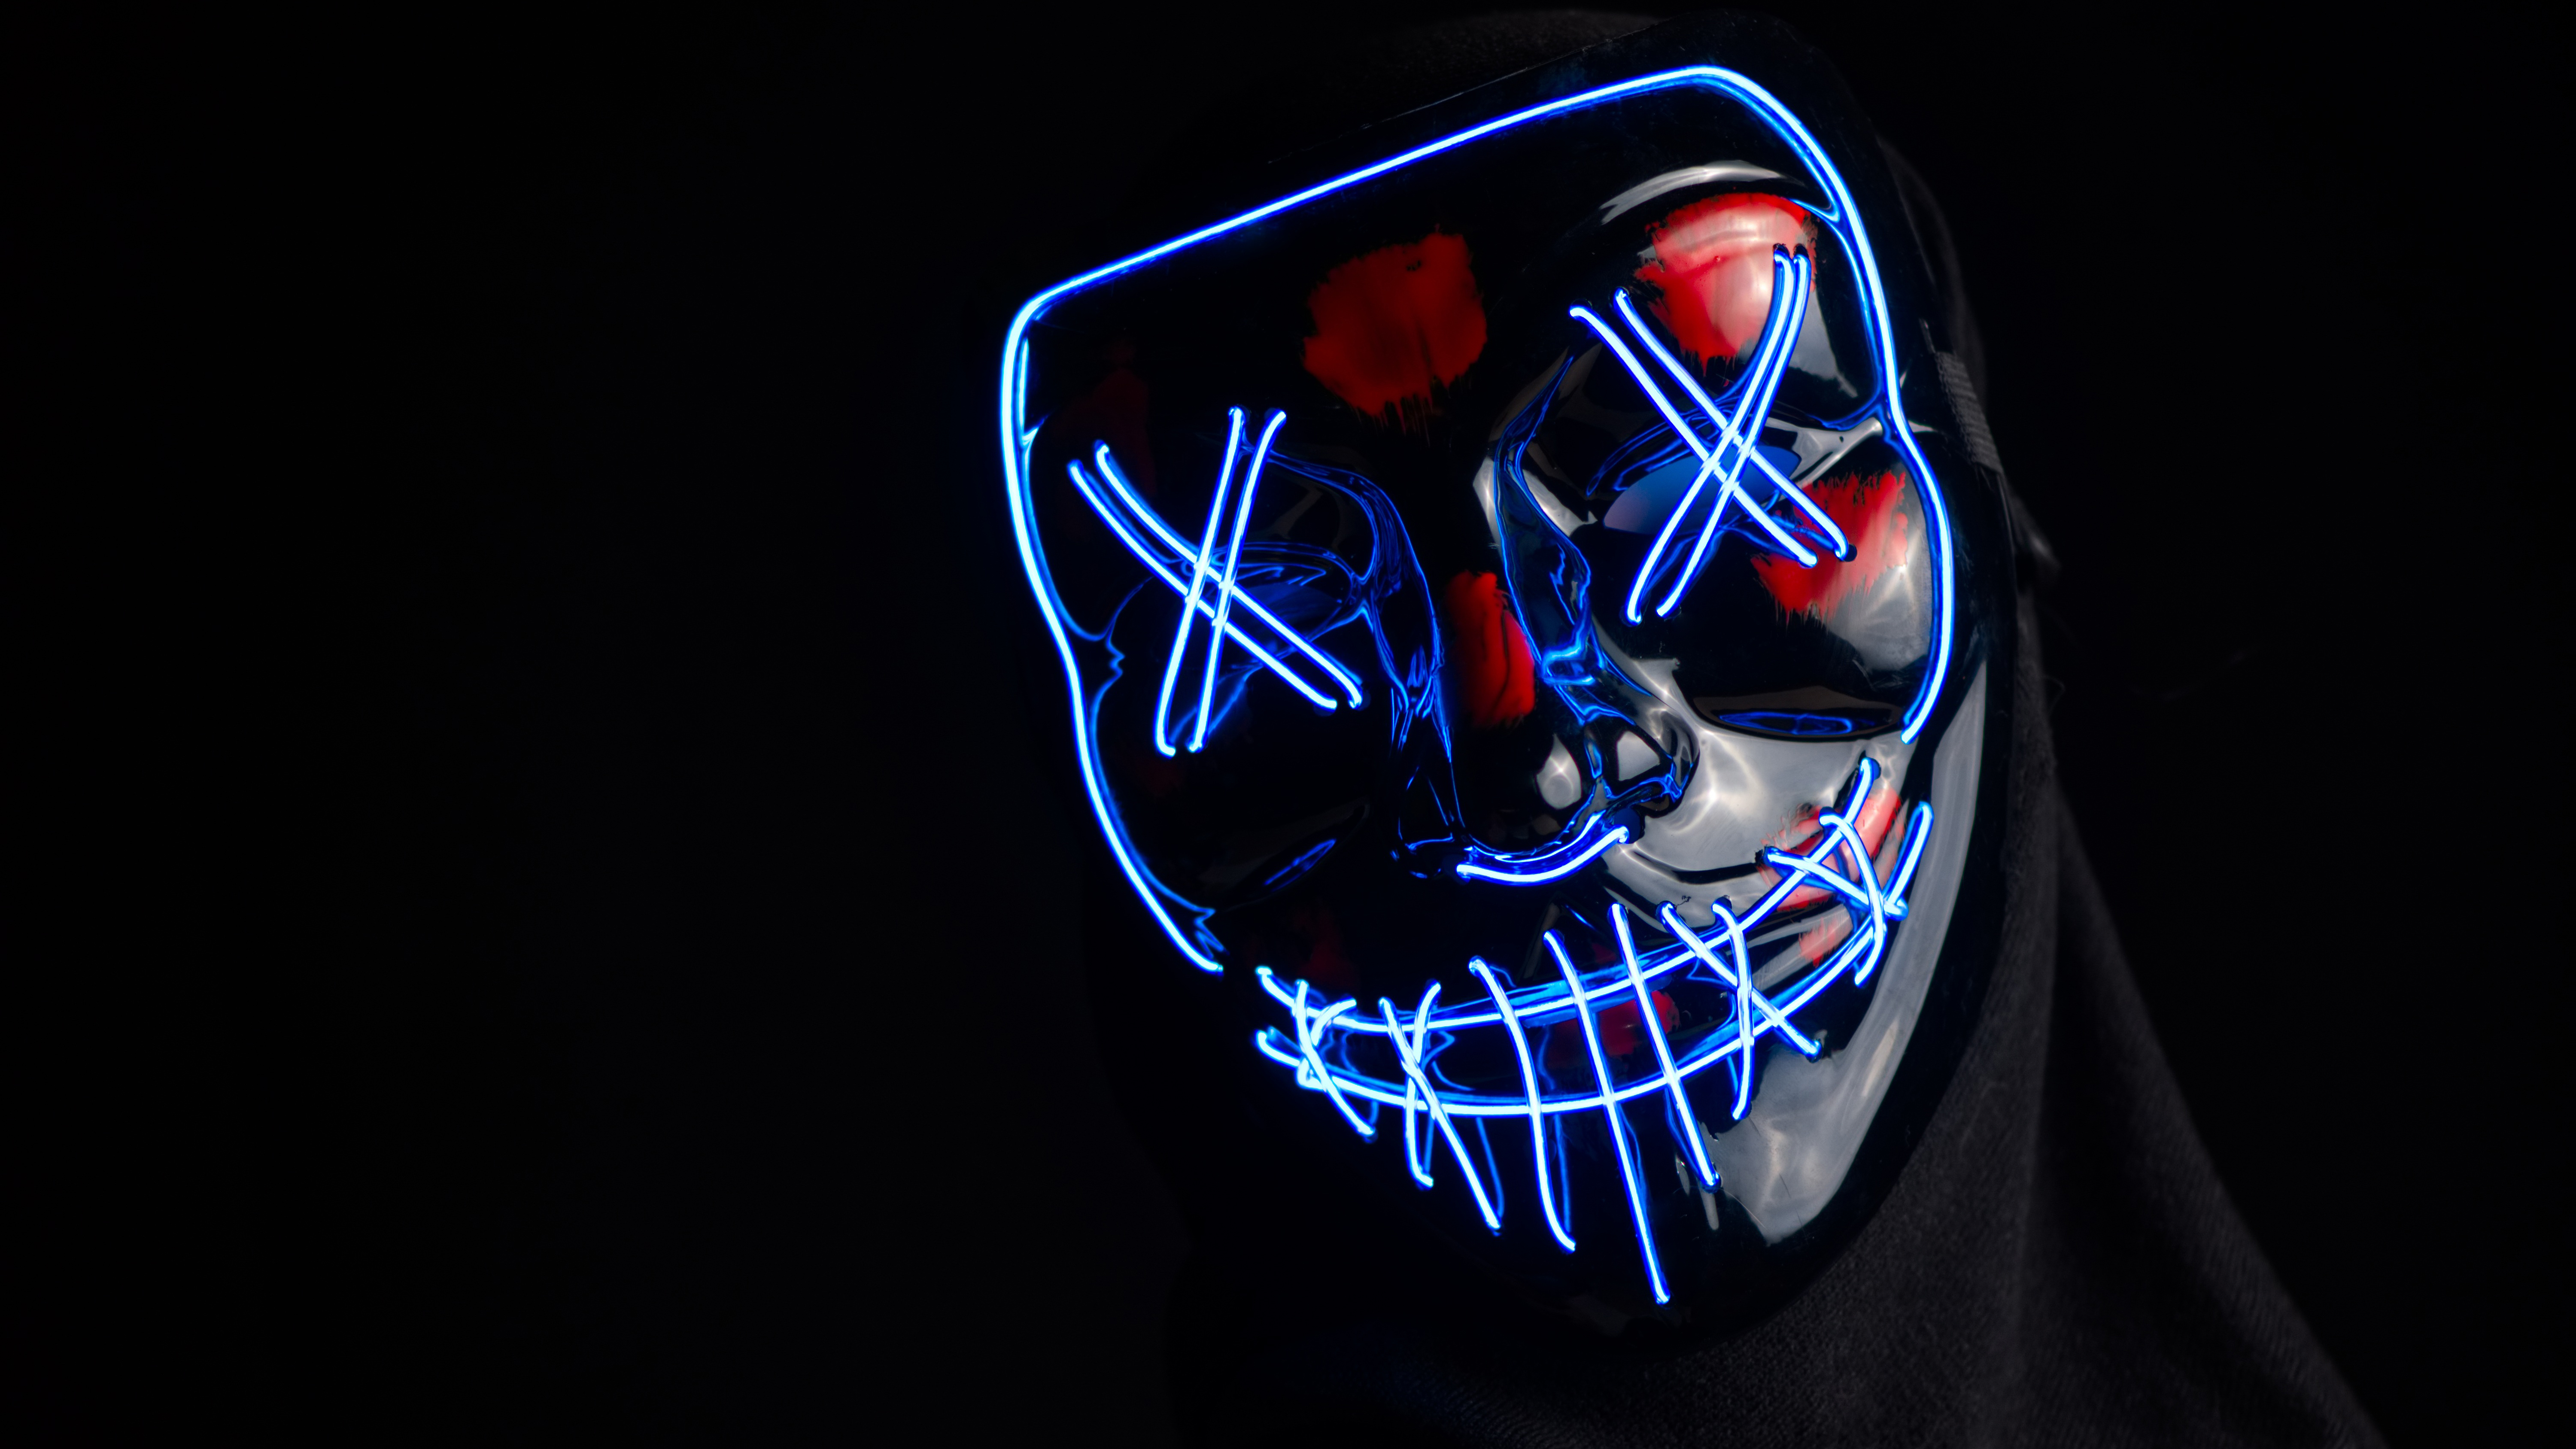 LED Mask 5K Wallpapers | Wallpapers HD